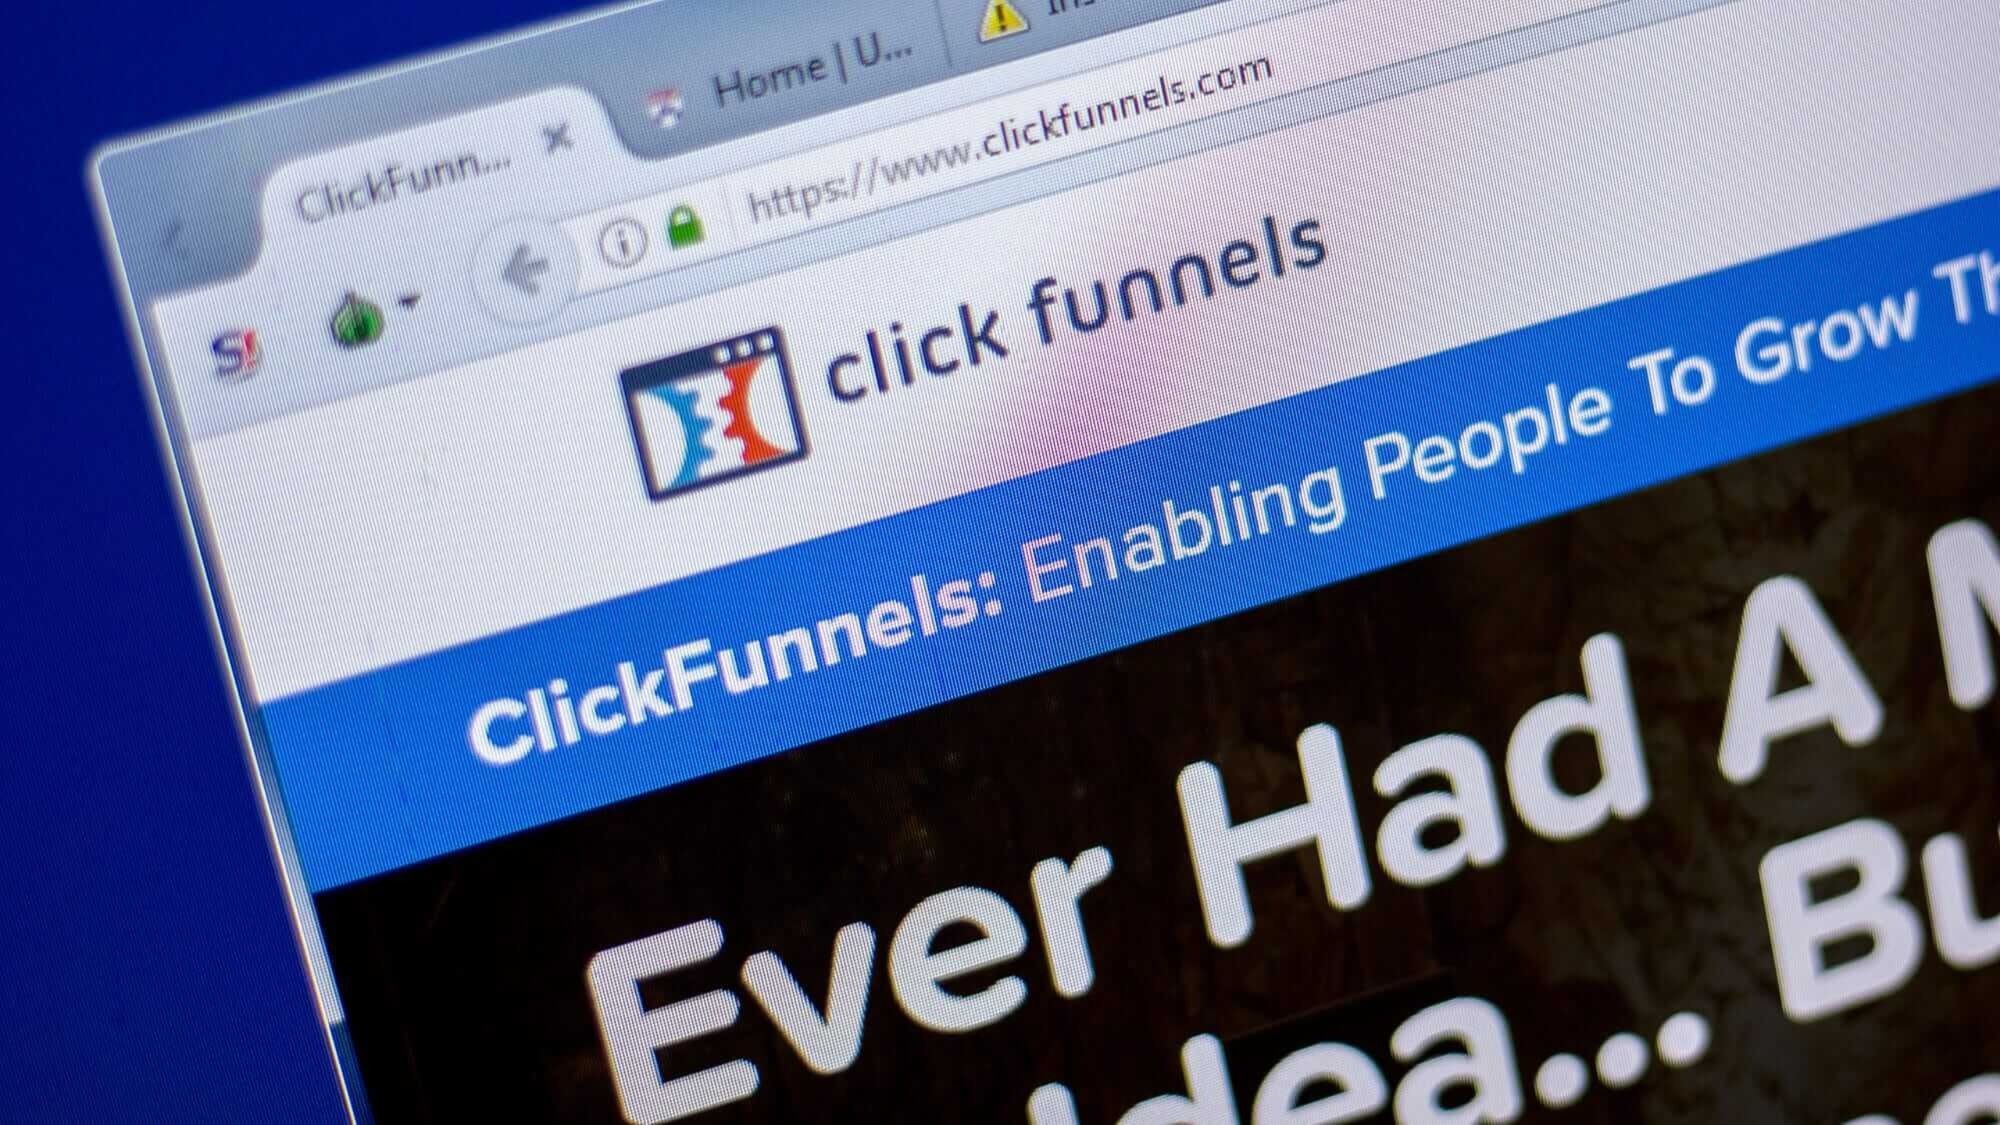 What Does How Much Is The Paused Feature In Clickfunnels Mean?